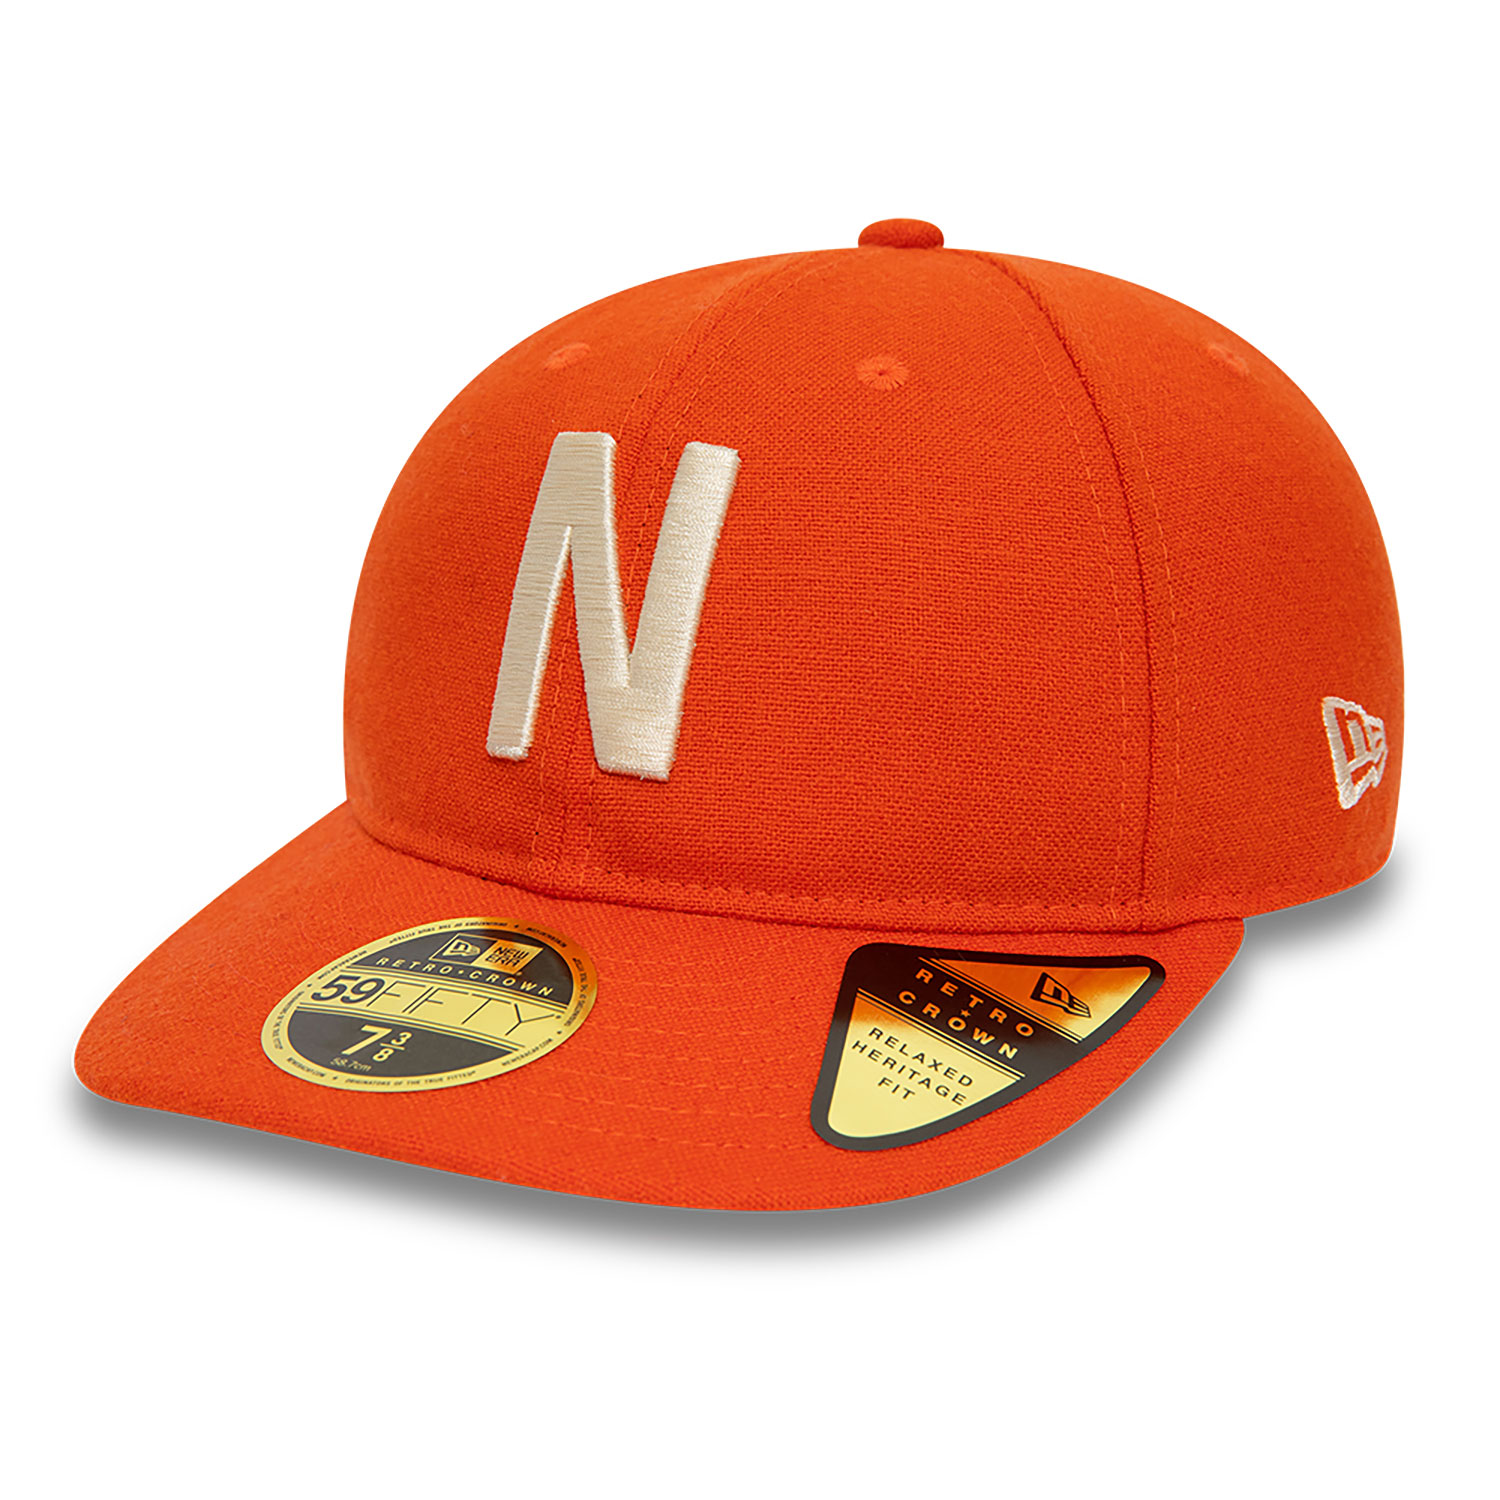 New Era x Norse Projects Orange 59FIFTY Retro Crown Fitted Cap